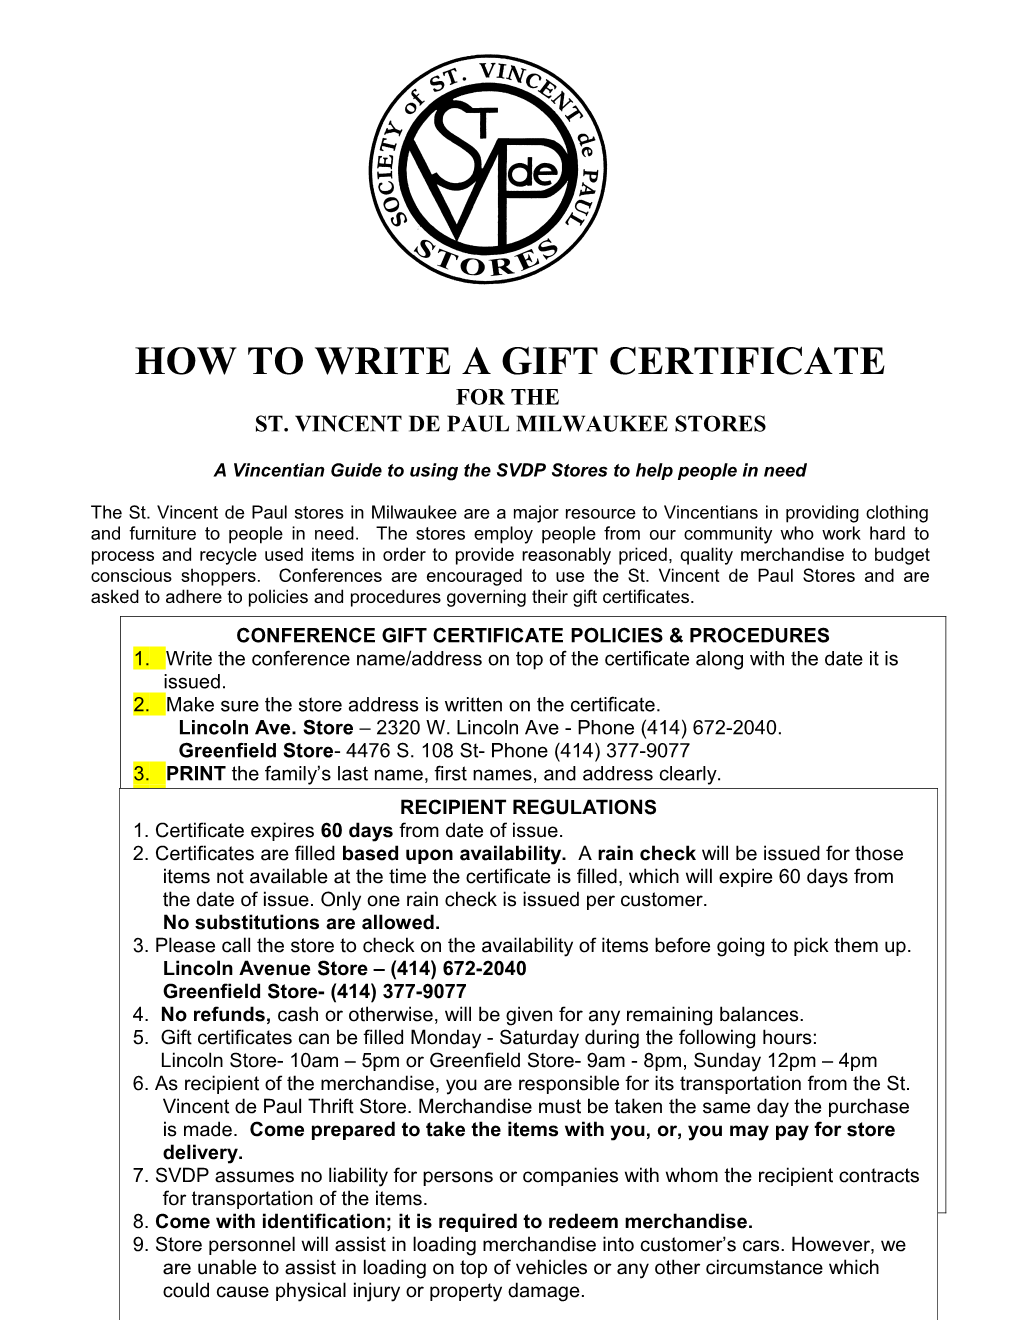 How to Write a Gift Certificate